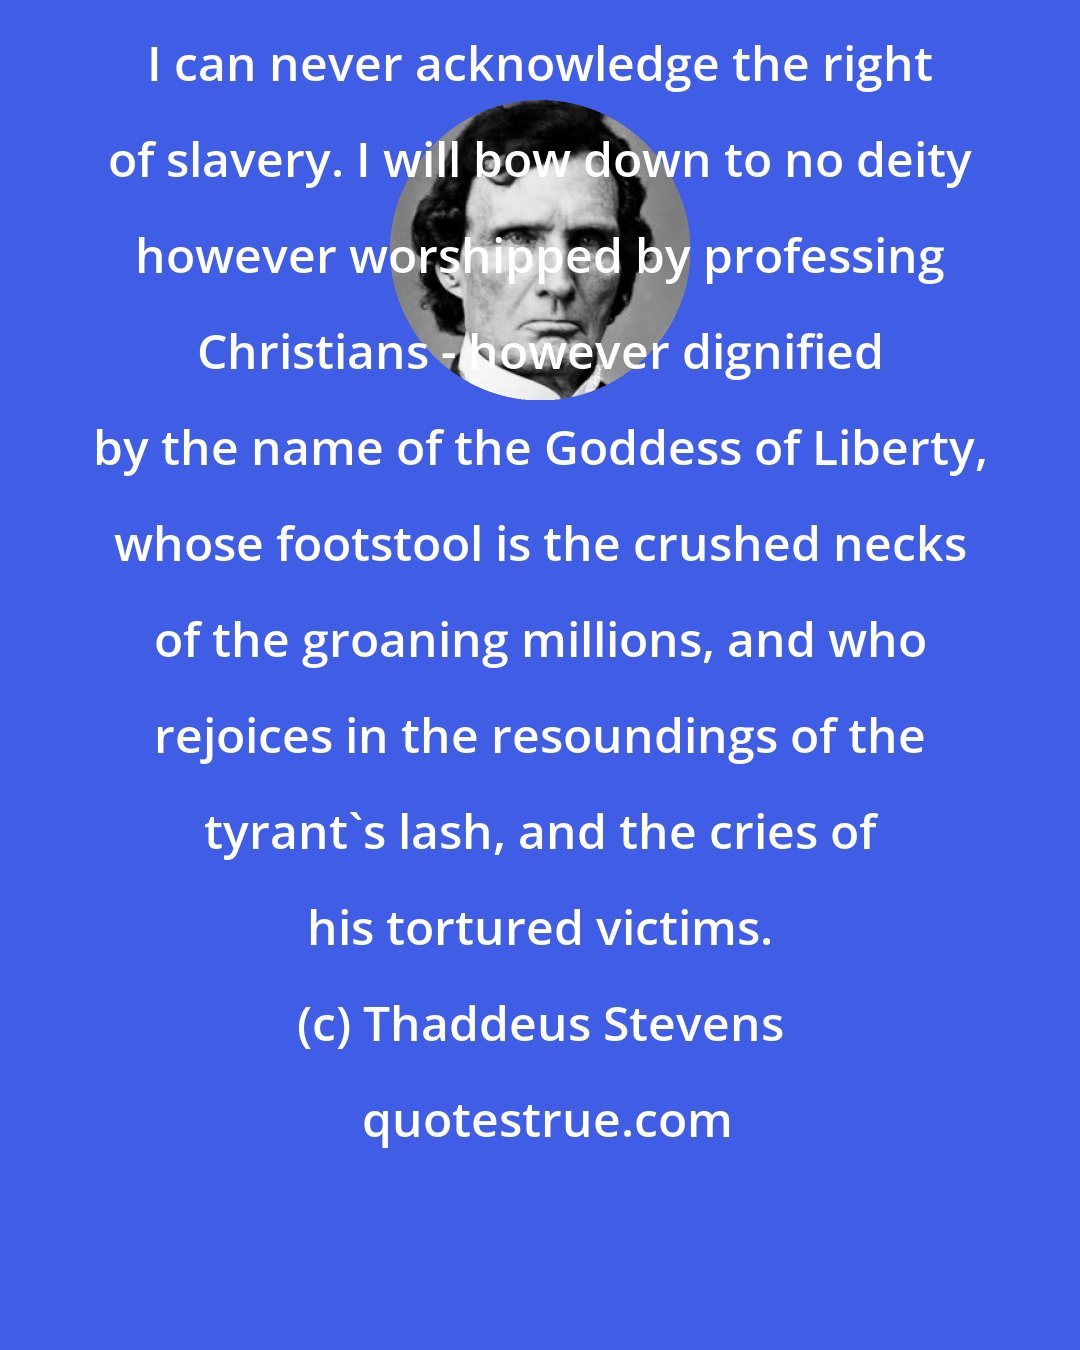 Thaddeus Stevens: I can never acknowledge the right of slavery. I will bow down to no deity however worshipped by professing Christians - however dignified by the name of the Goddess of Liberty, whose footstool is the crushed necks of the groaning millions, and who rejoices in the resoundings of the tyrant's lash, and the cries of his tortured victims.